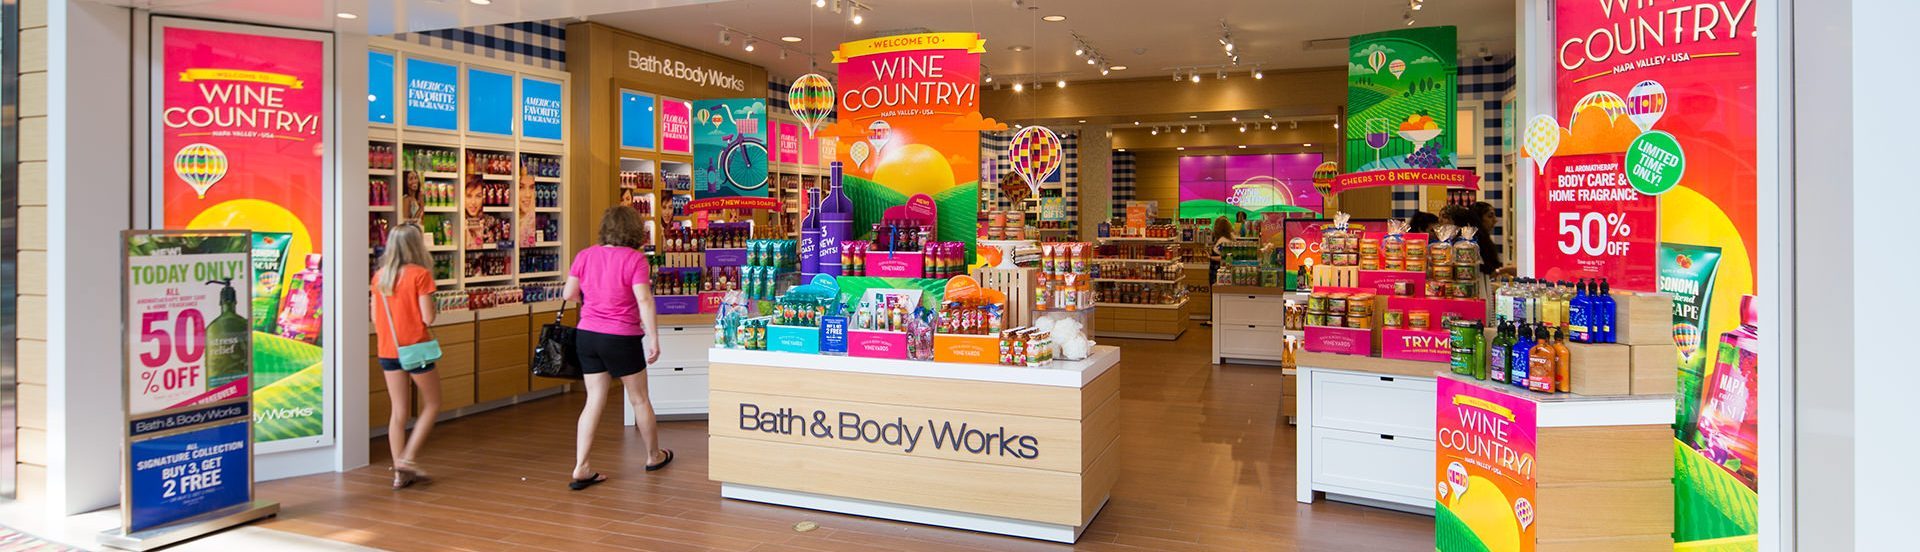 bath and body works outlet website